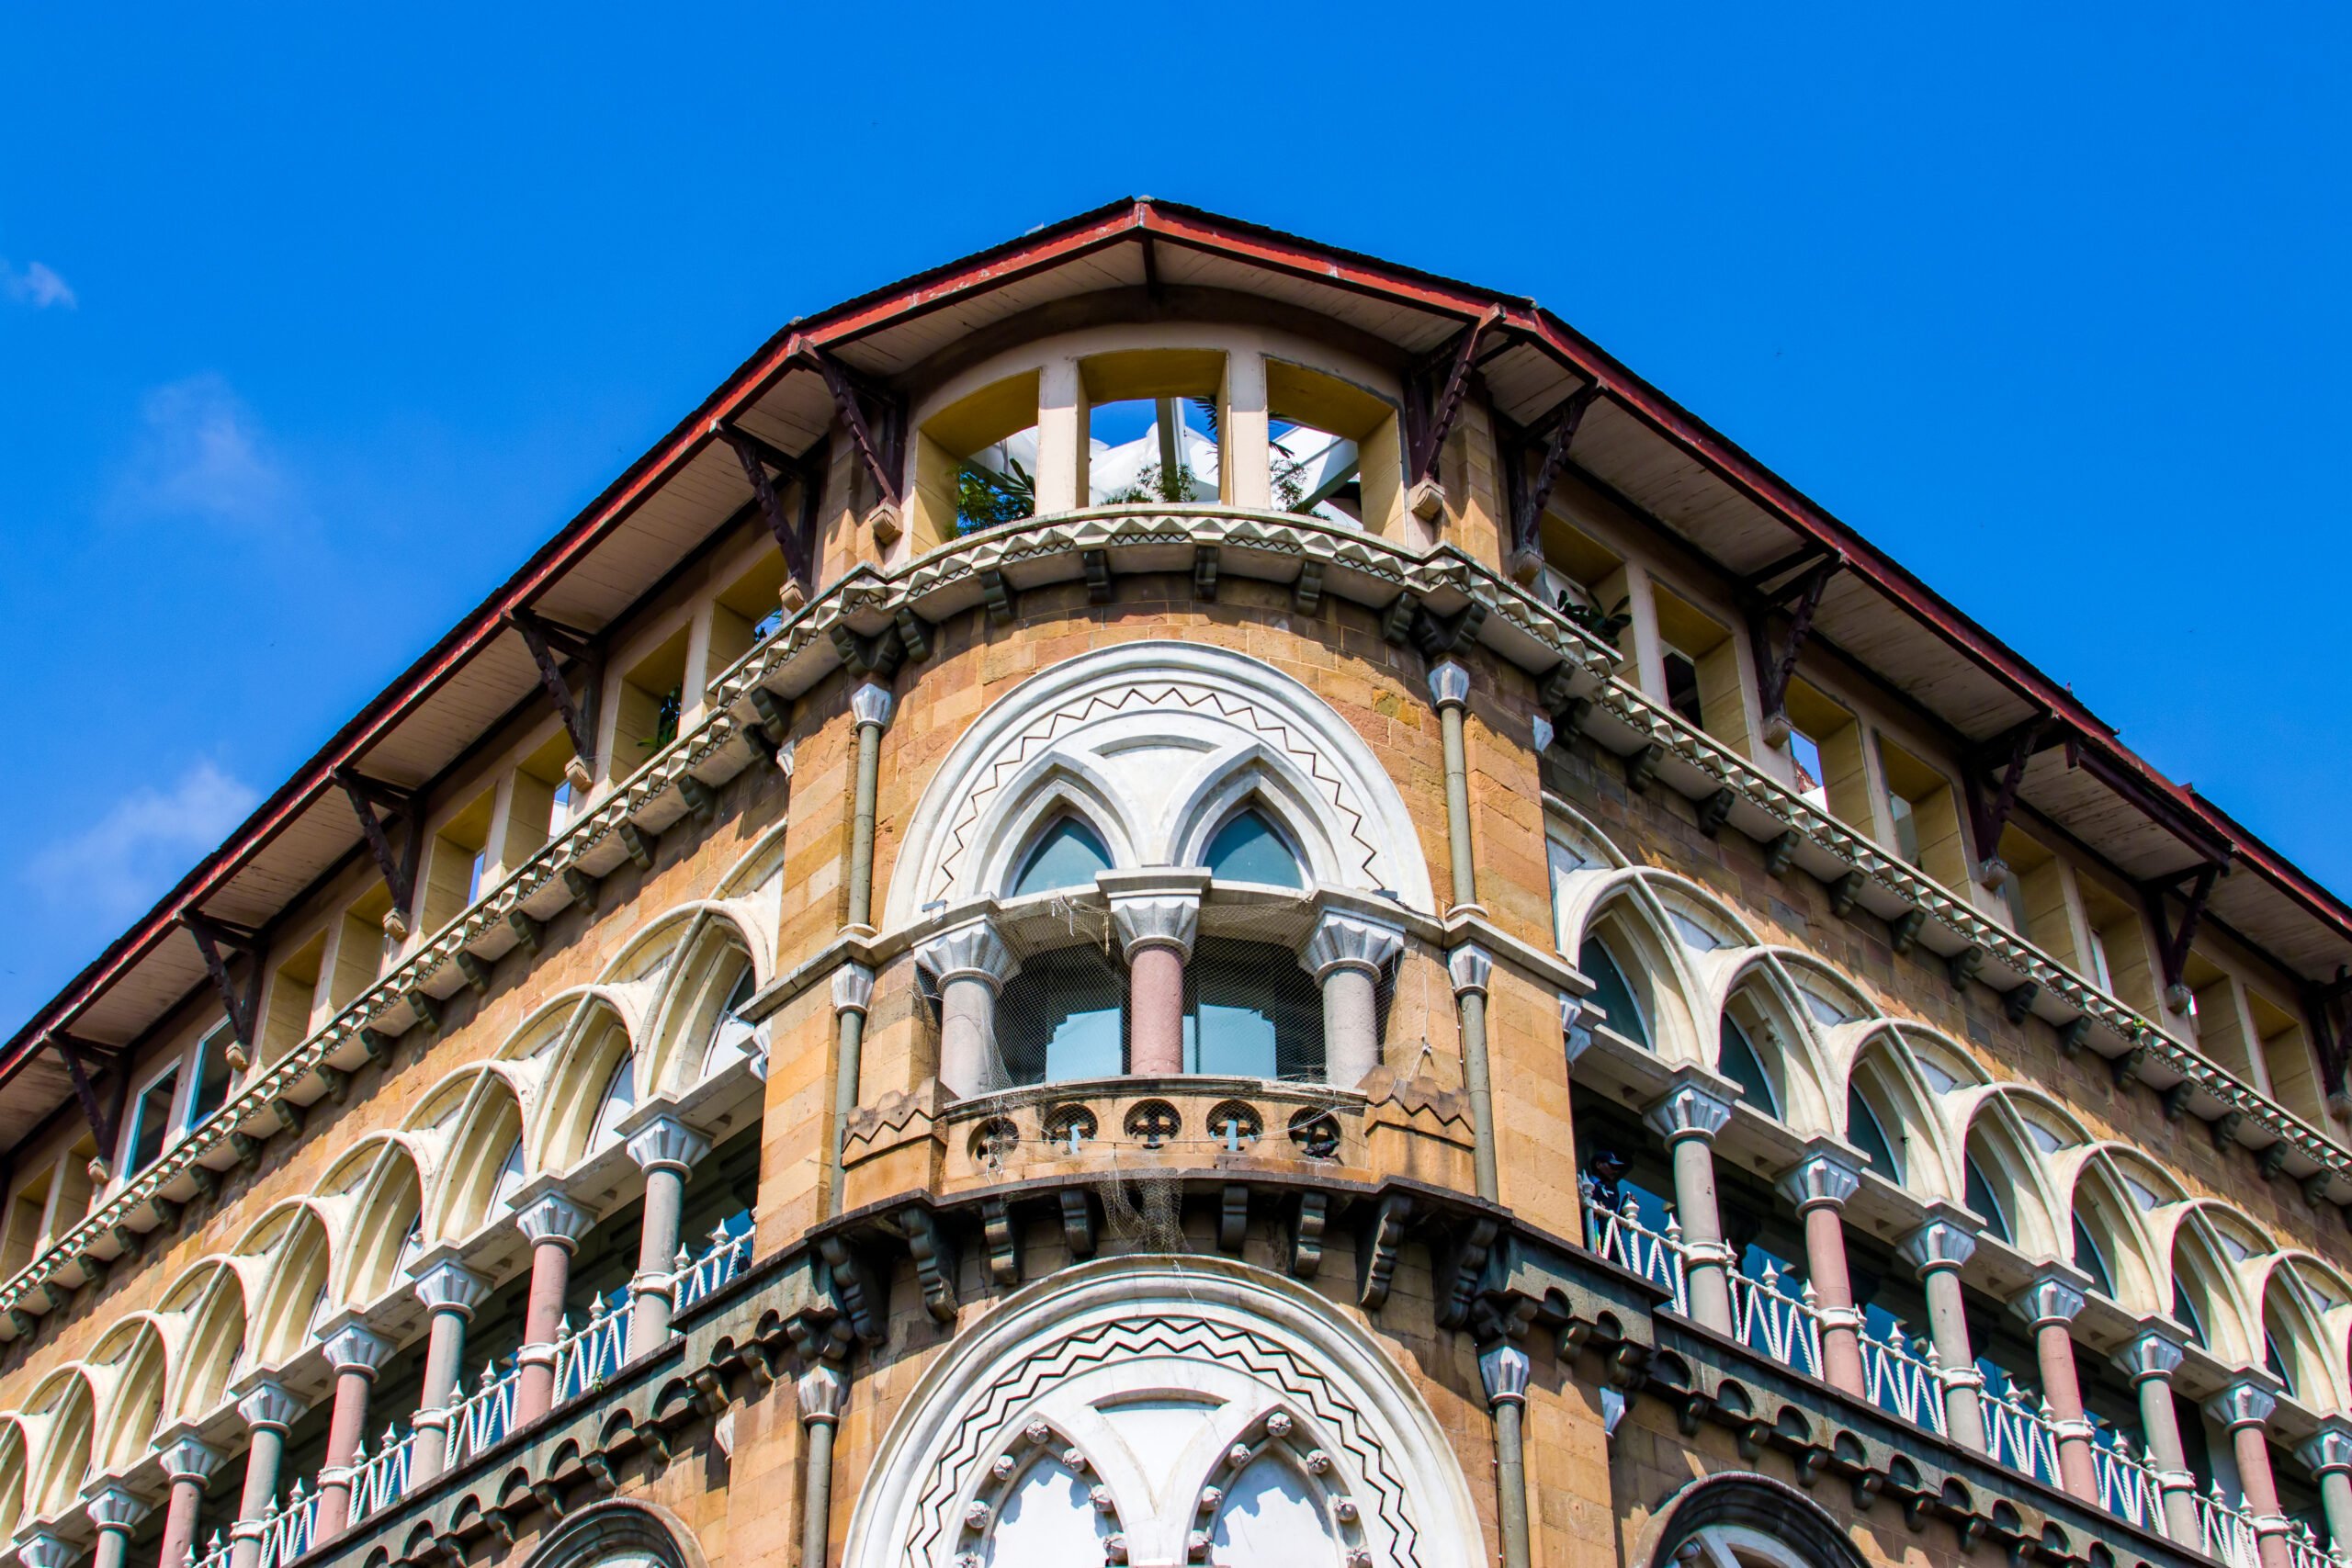 Learn About Gothic Architecture In Our Mumbai's Gothic And Art Deco Tour